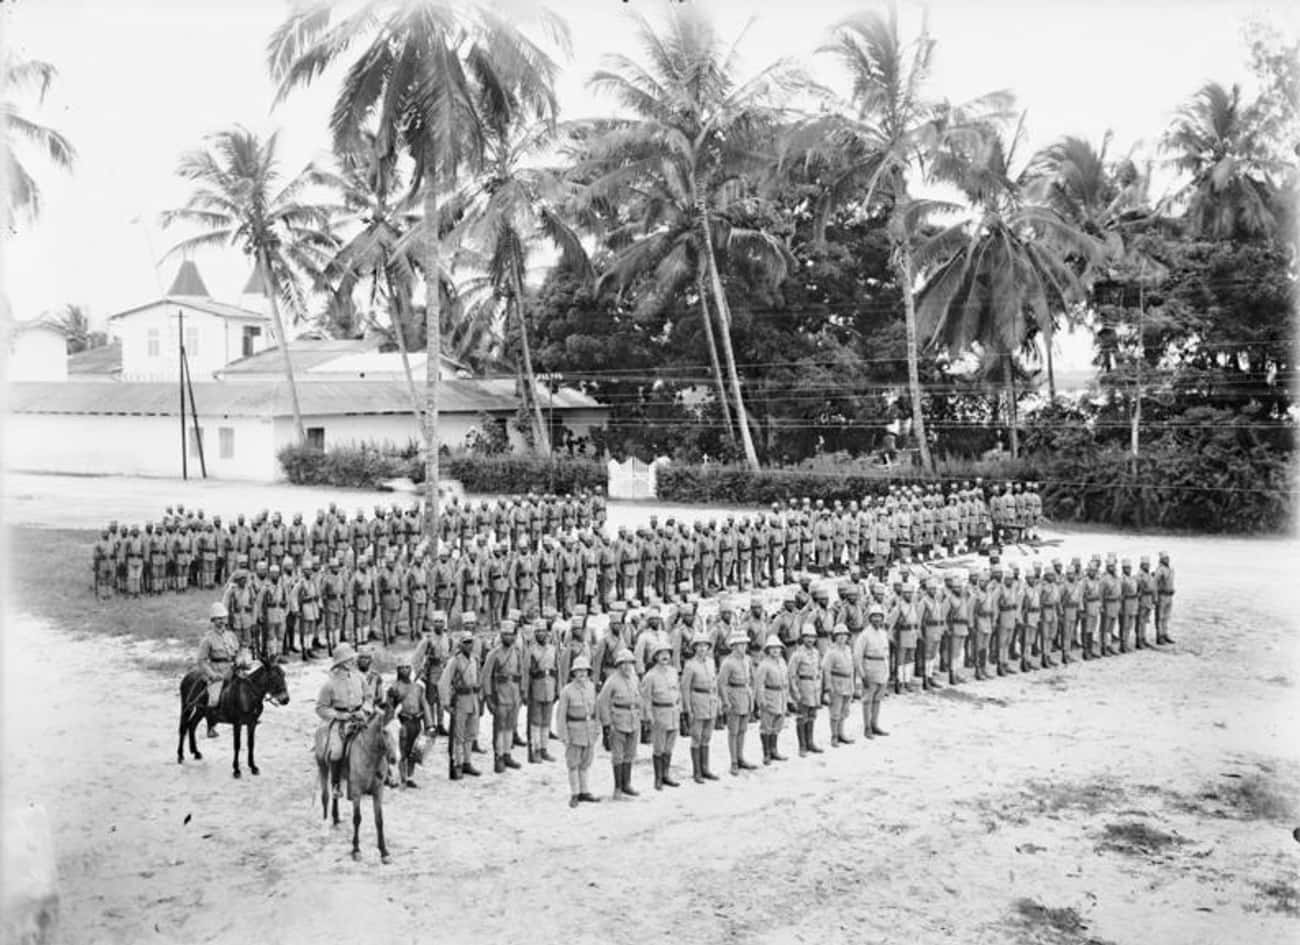 A Small German Army Kept The Allies Busy In East Africa For The Entire War